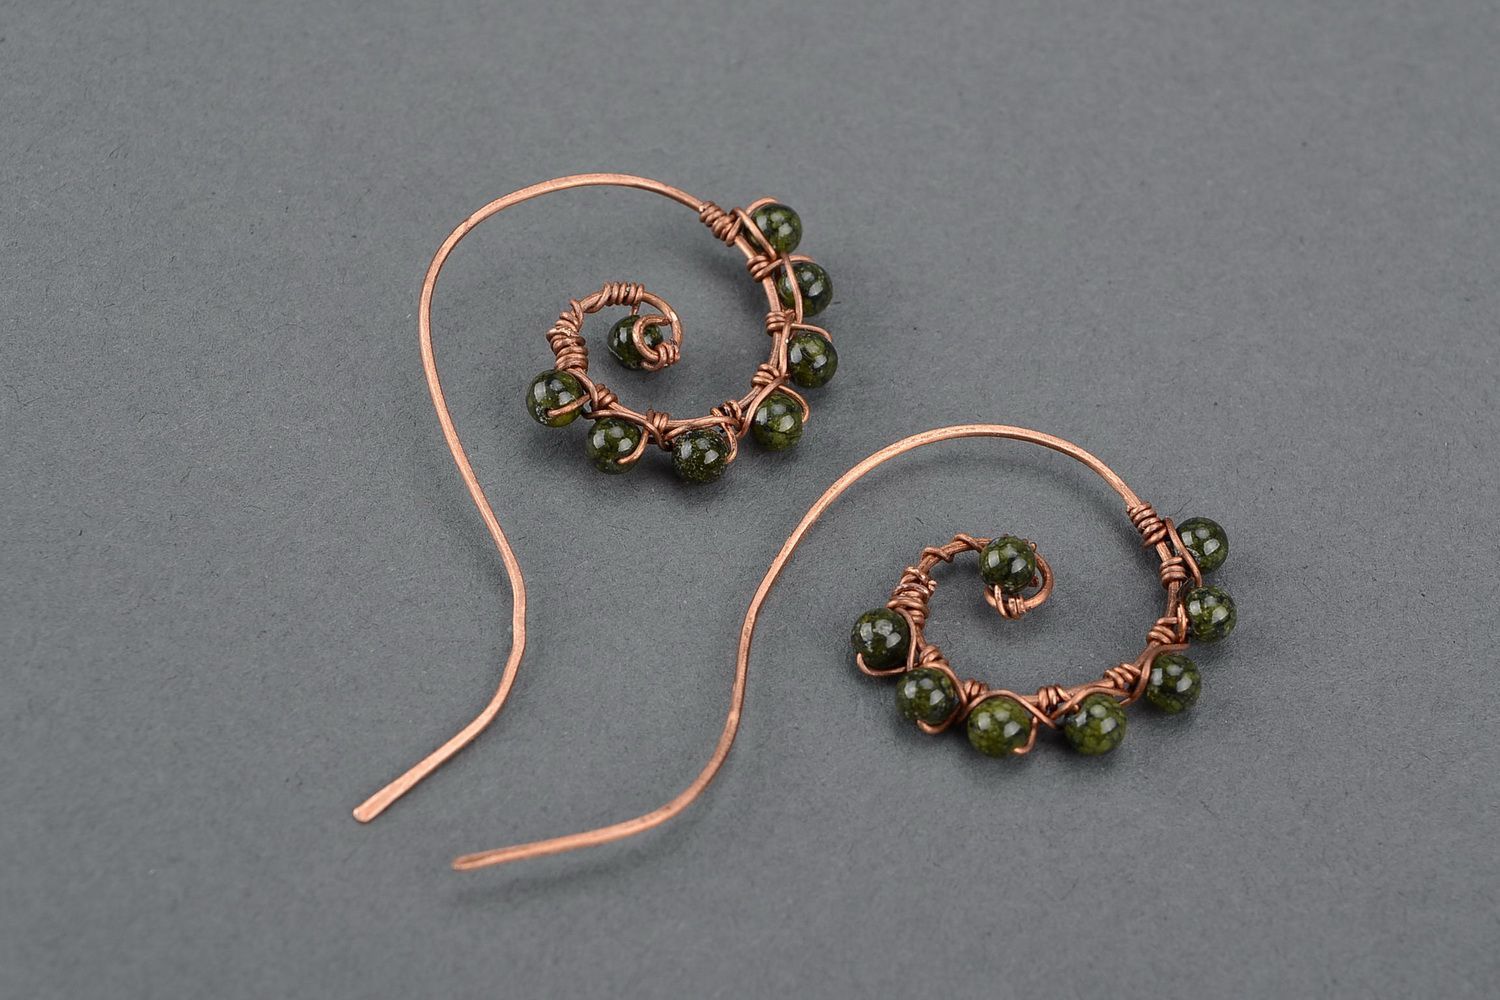 Eaarrings made of copper wire, stone - serpentine photo 2